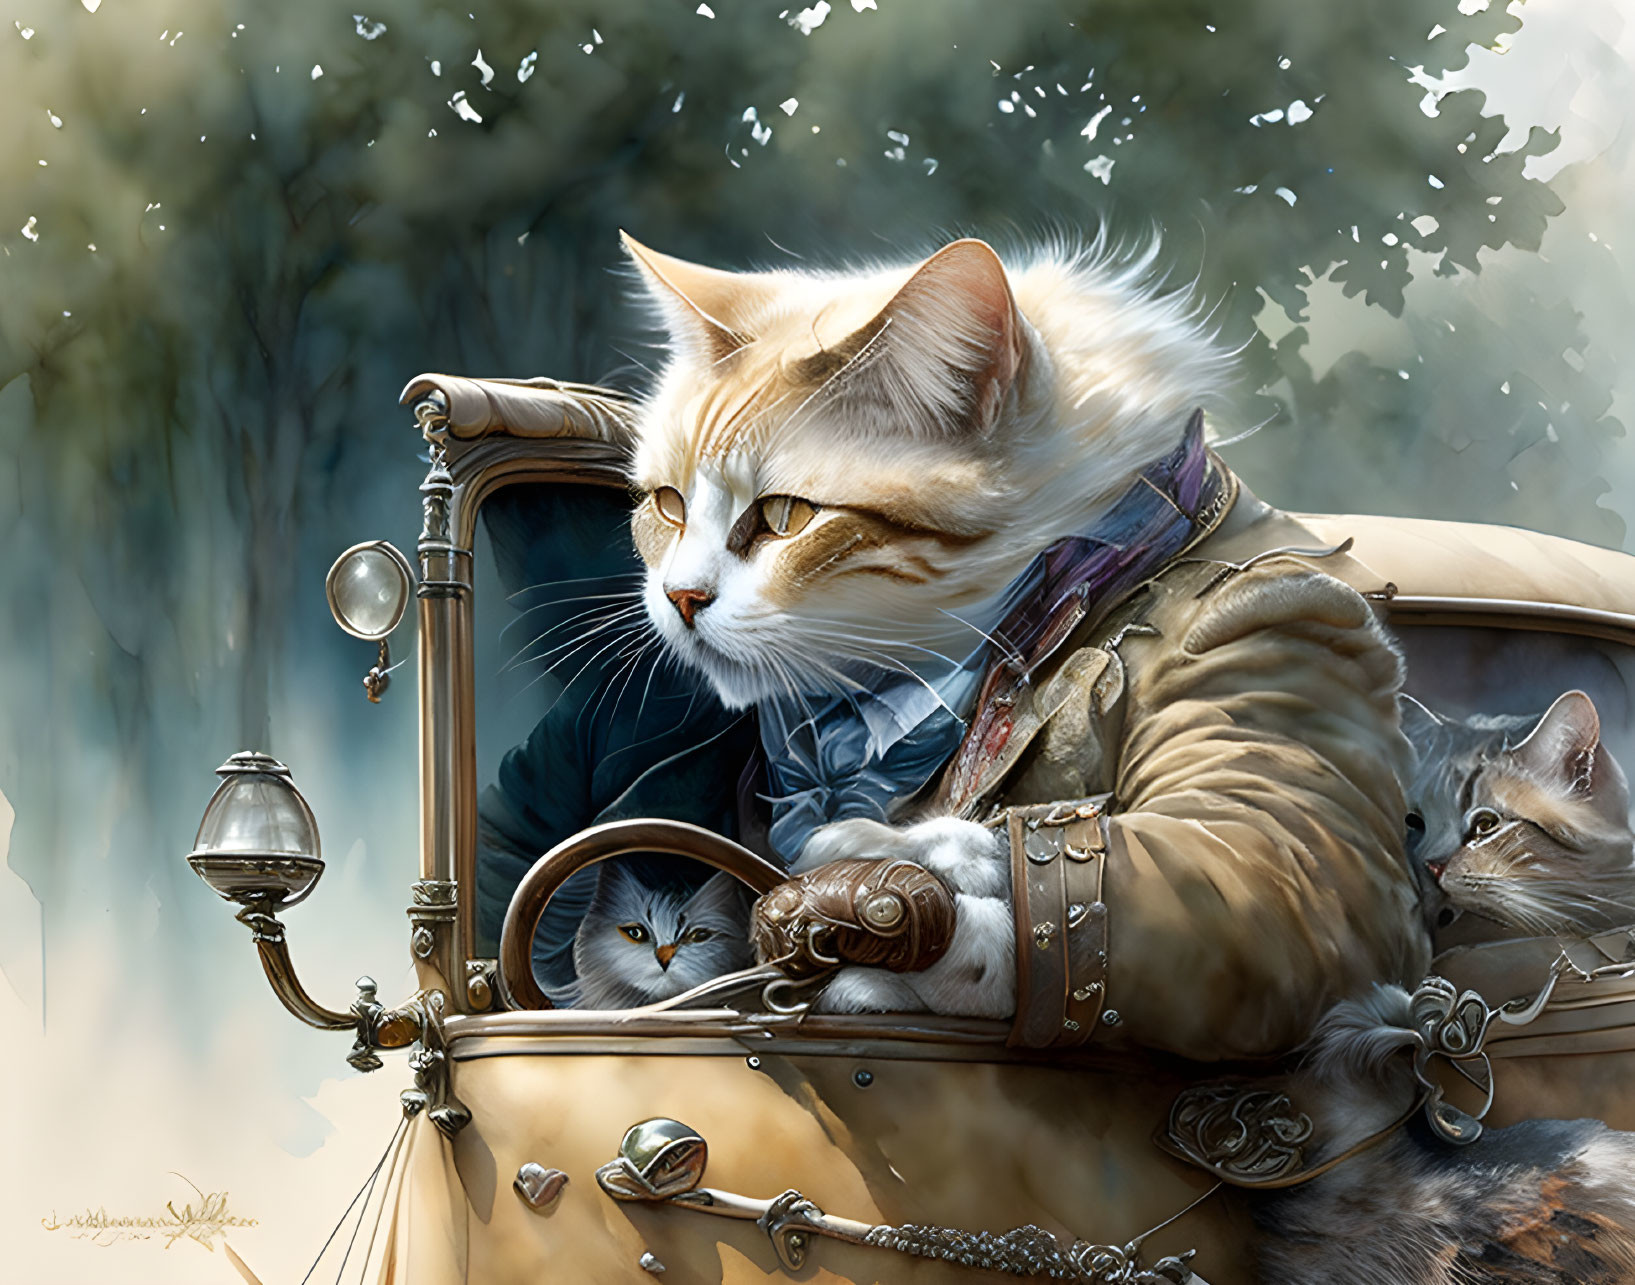 Anthropomorphic cat in elegant attire driving vintage car with two passengers.